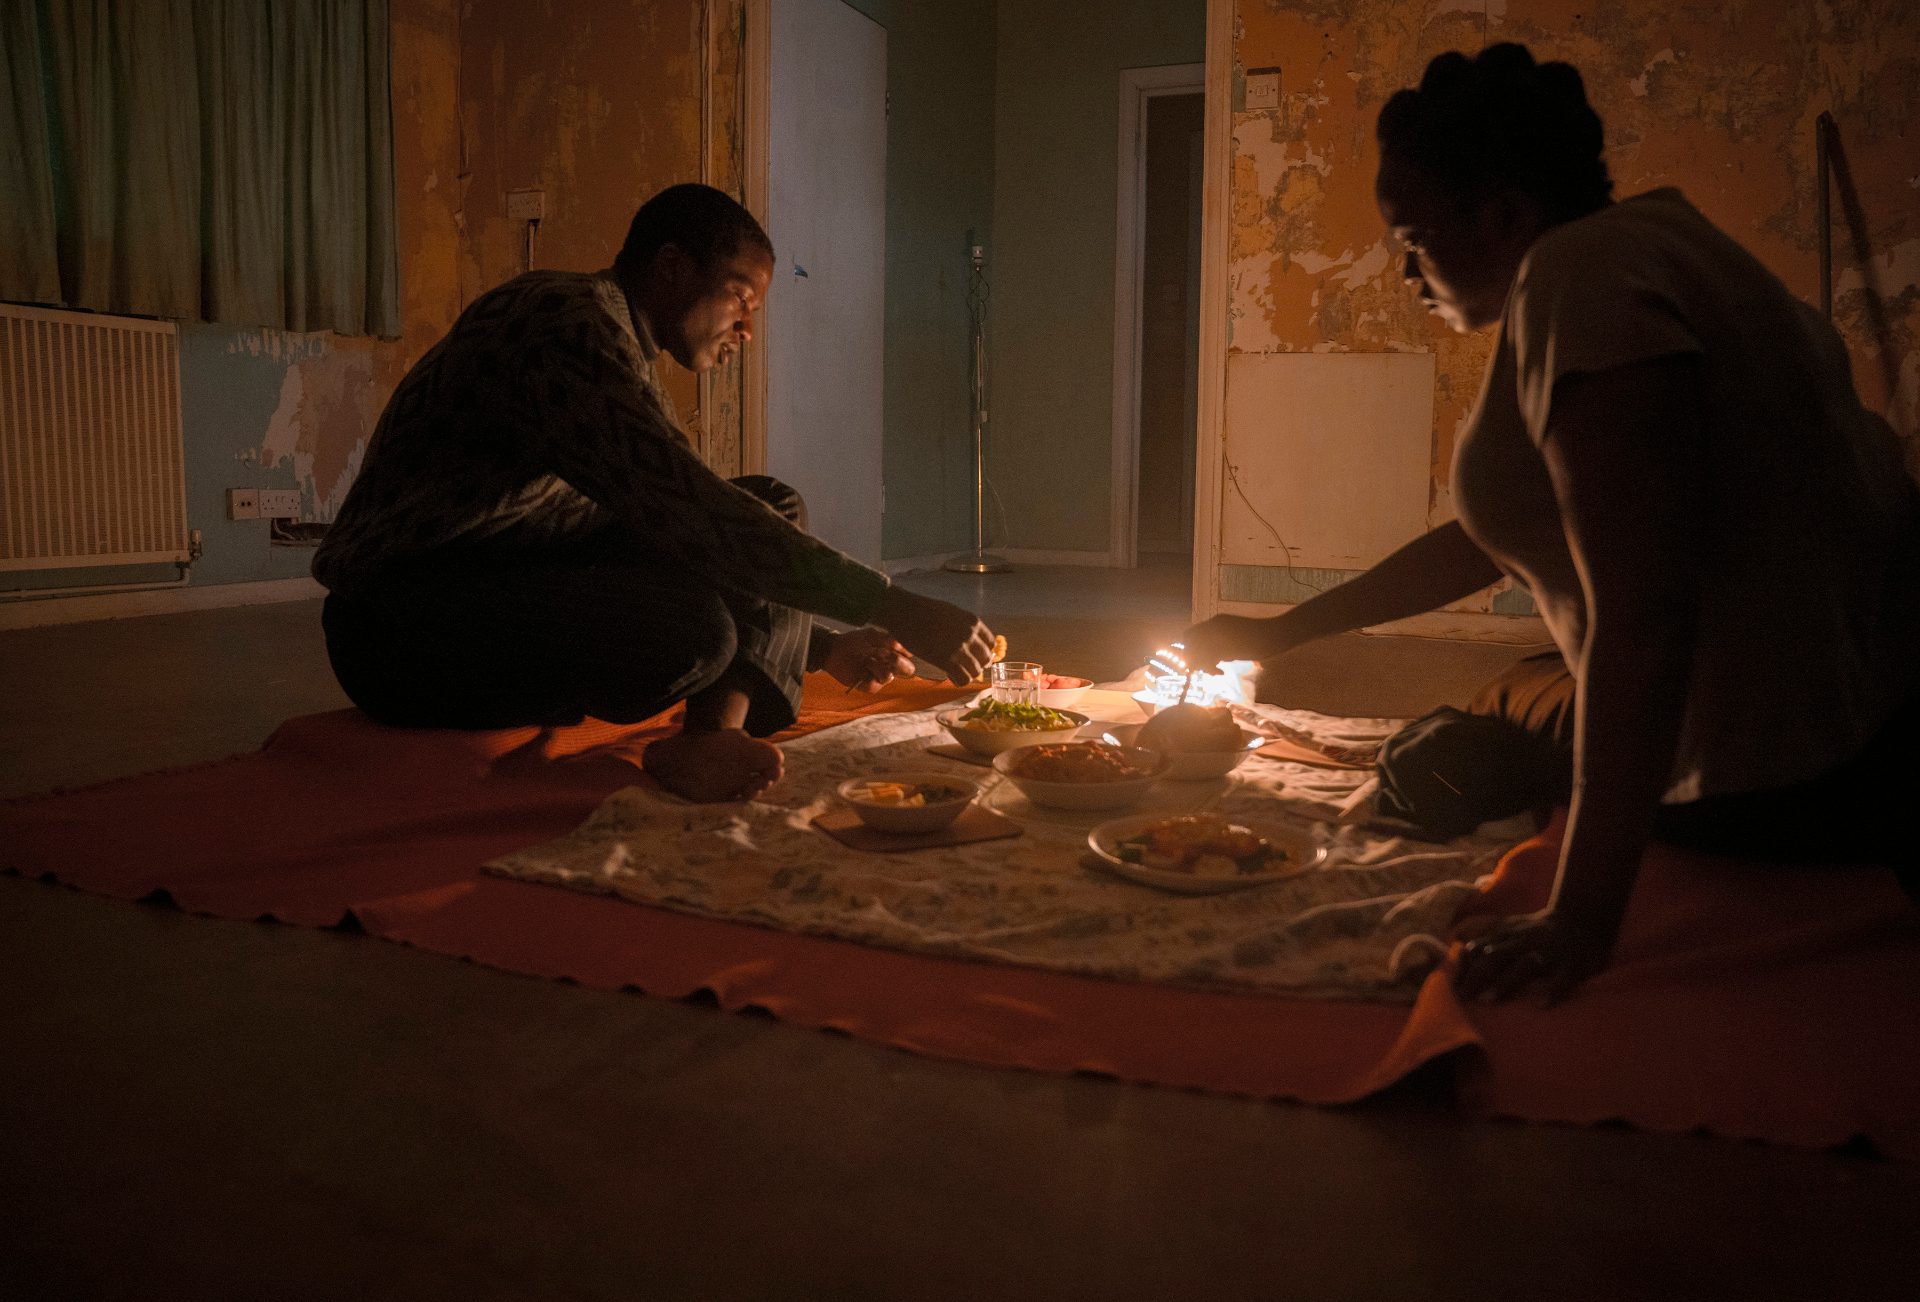 Still from 'His House' showing man and woman eating meal on blanket in undecorated room